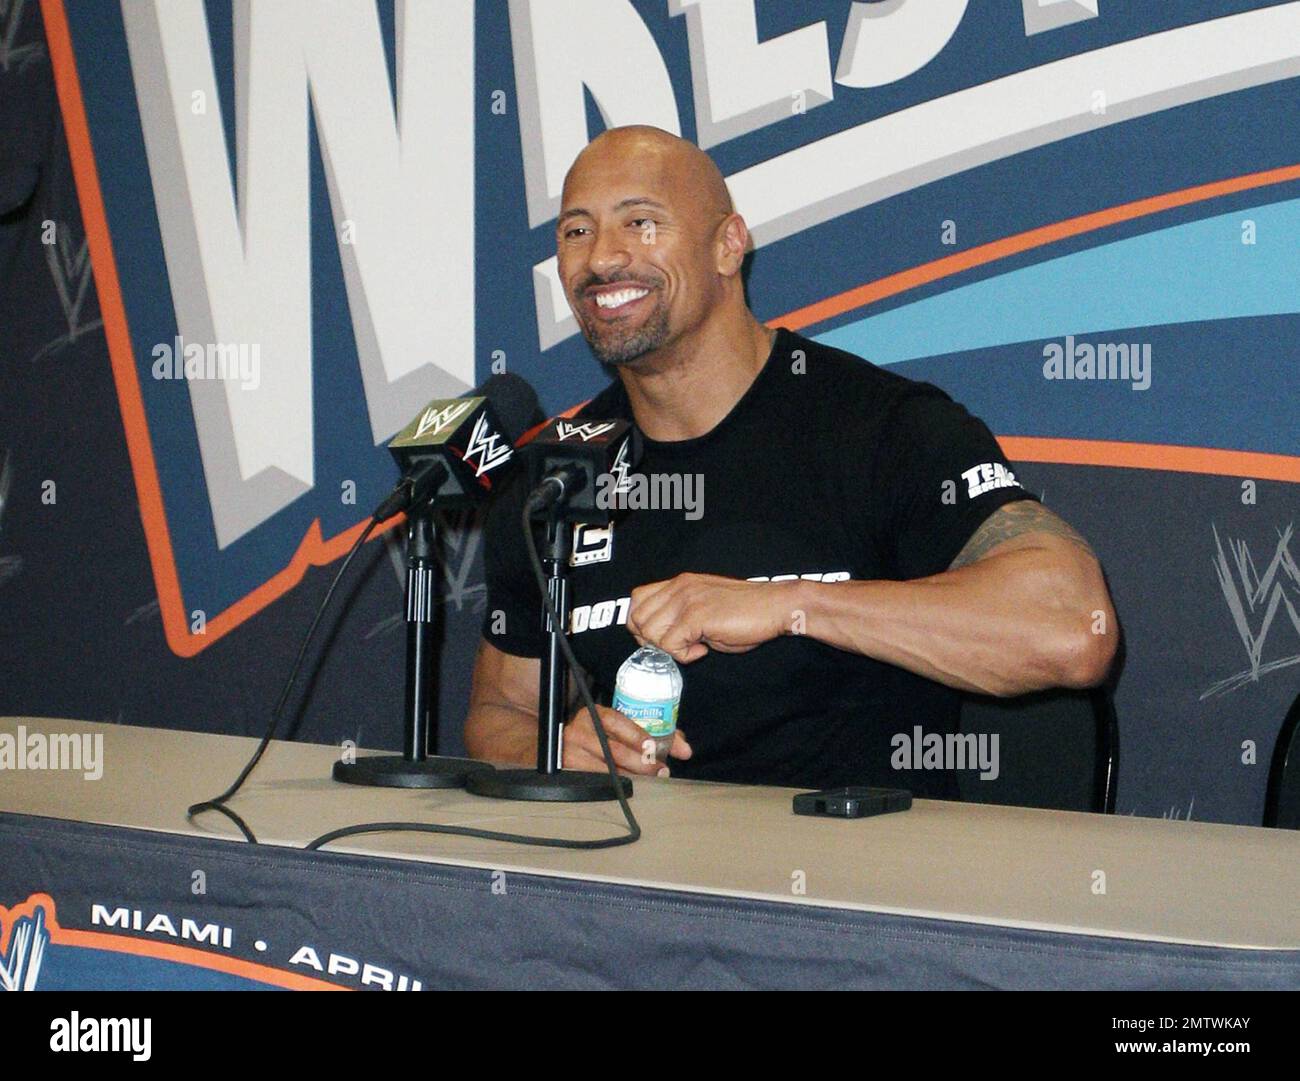 Dwayne The Rock Johnson, John Cena in attendance for WRESTLEMANIA XXVII  Press Conference, Hard Rock Cafe, New York, NY March 30, 2011. Photo By:  Rob Rich/Everett Collection Stock Photo - Alamy